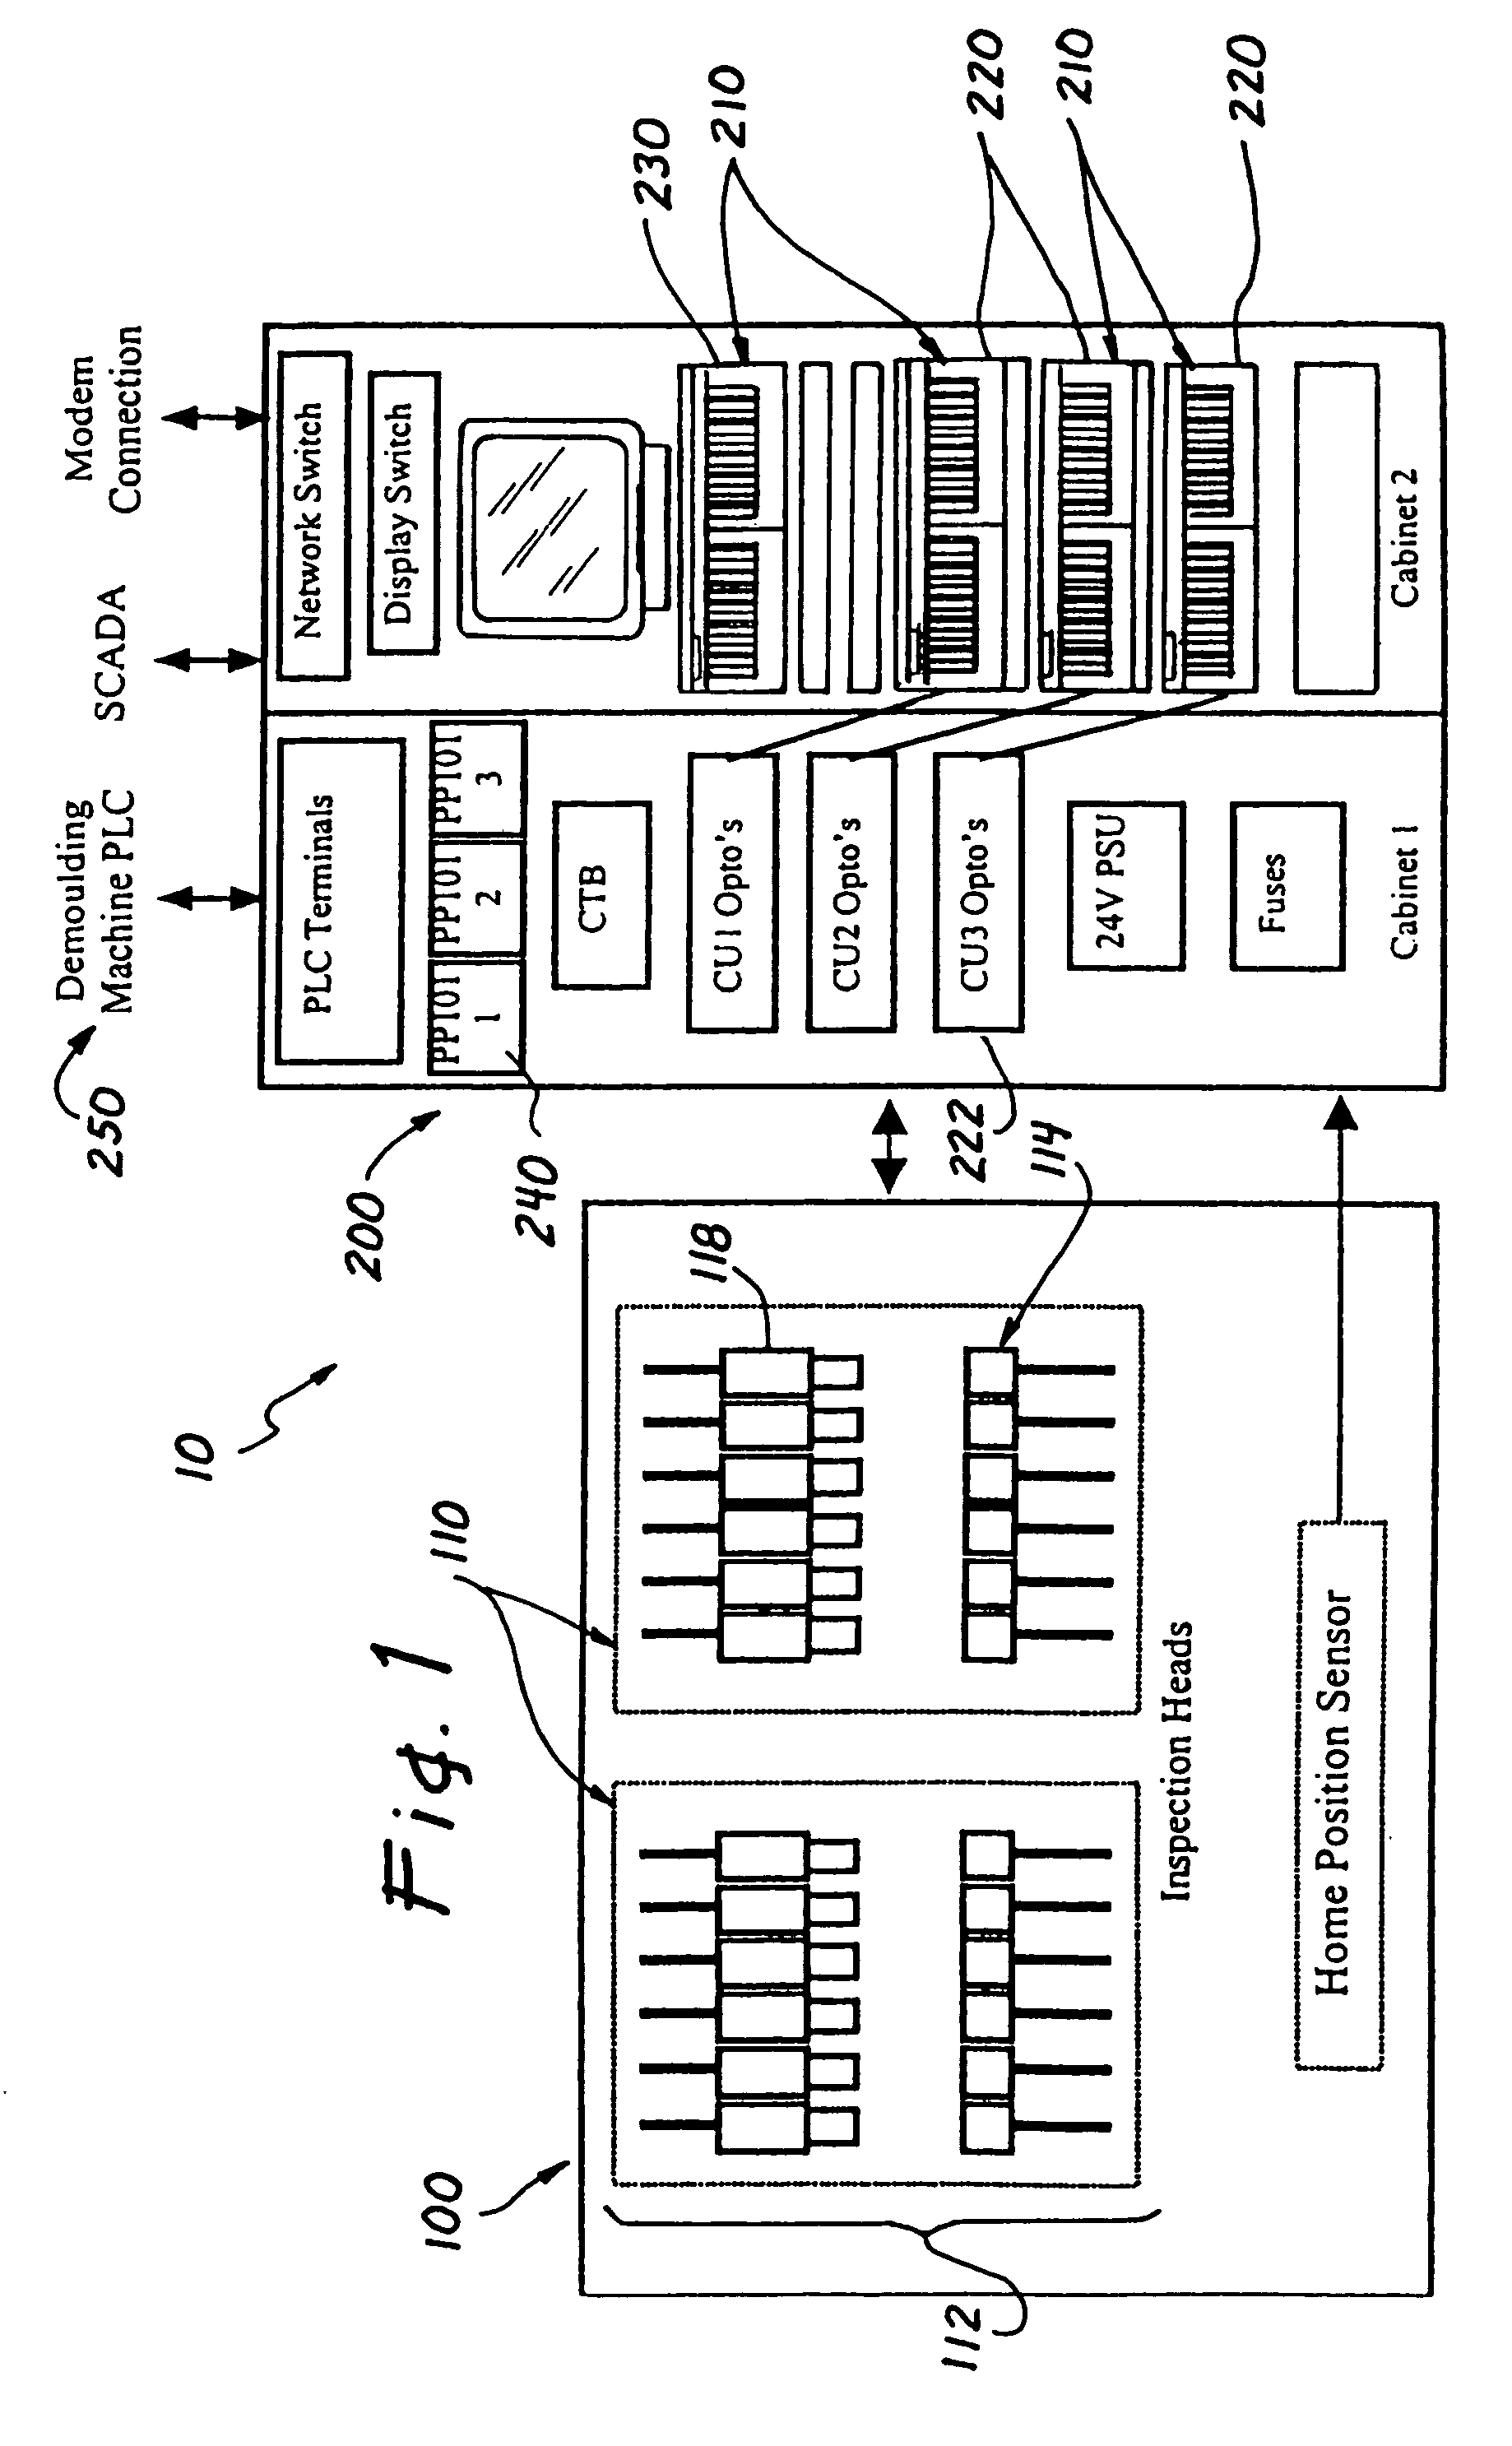 Systems and methods for inspection of ophthalmic lenses